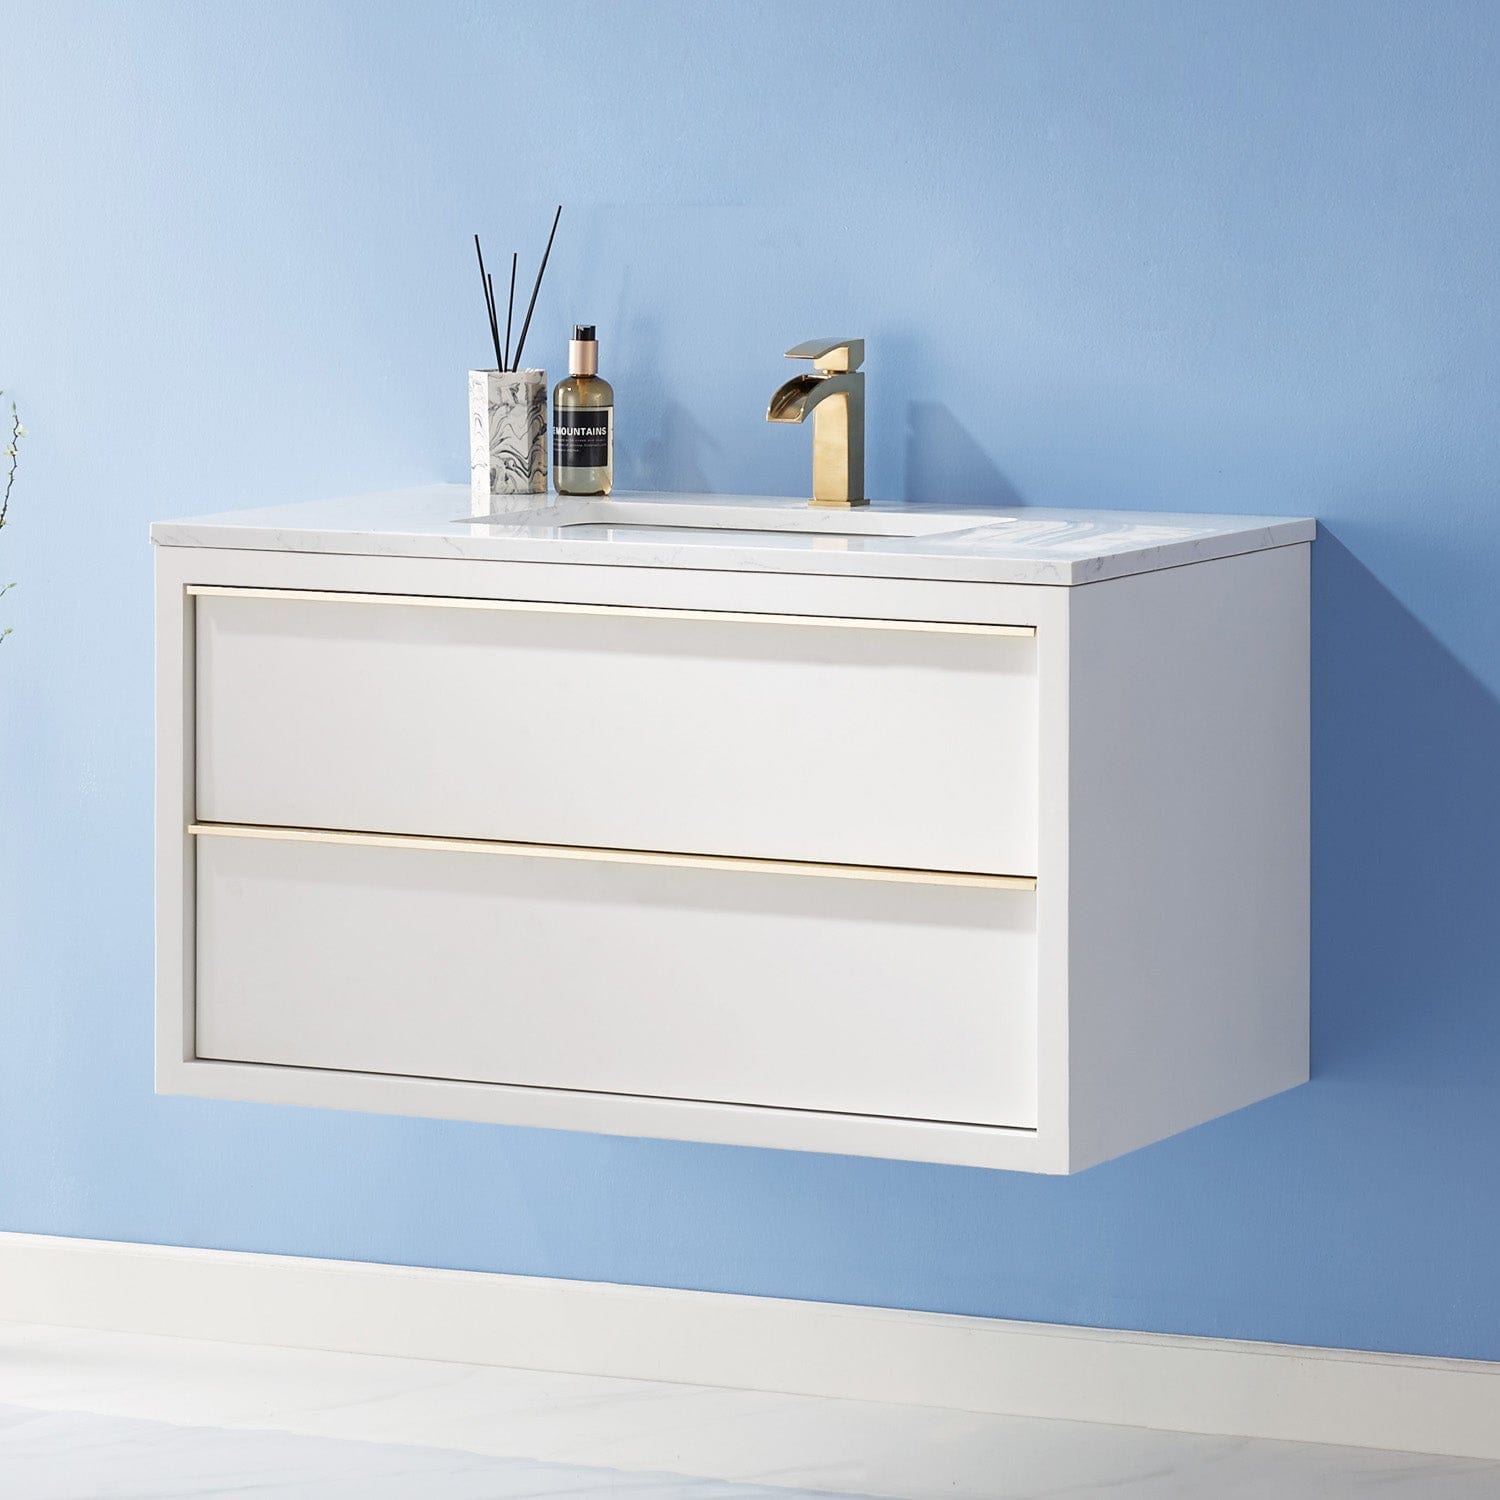 Altair Morgan 36" Single Bathroom Vanity Set in White and Composite Carrara White Stone Countertop without Mirror 534036-WH-AW-NM - Molaix631112971768Vanity534036-WH-AW-NM